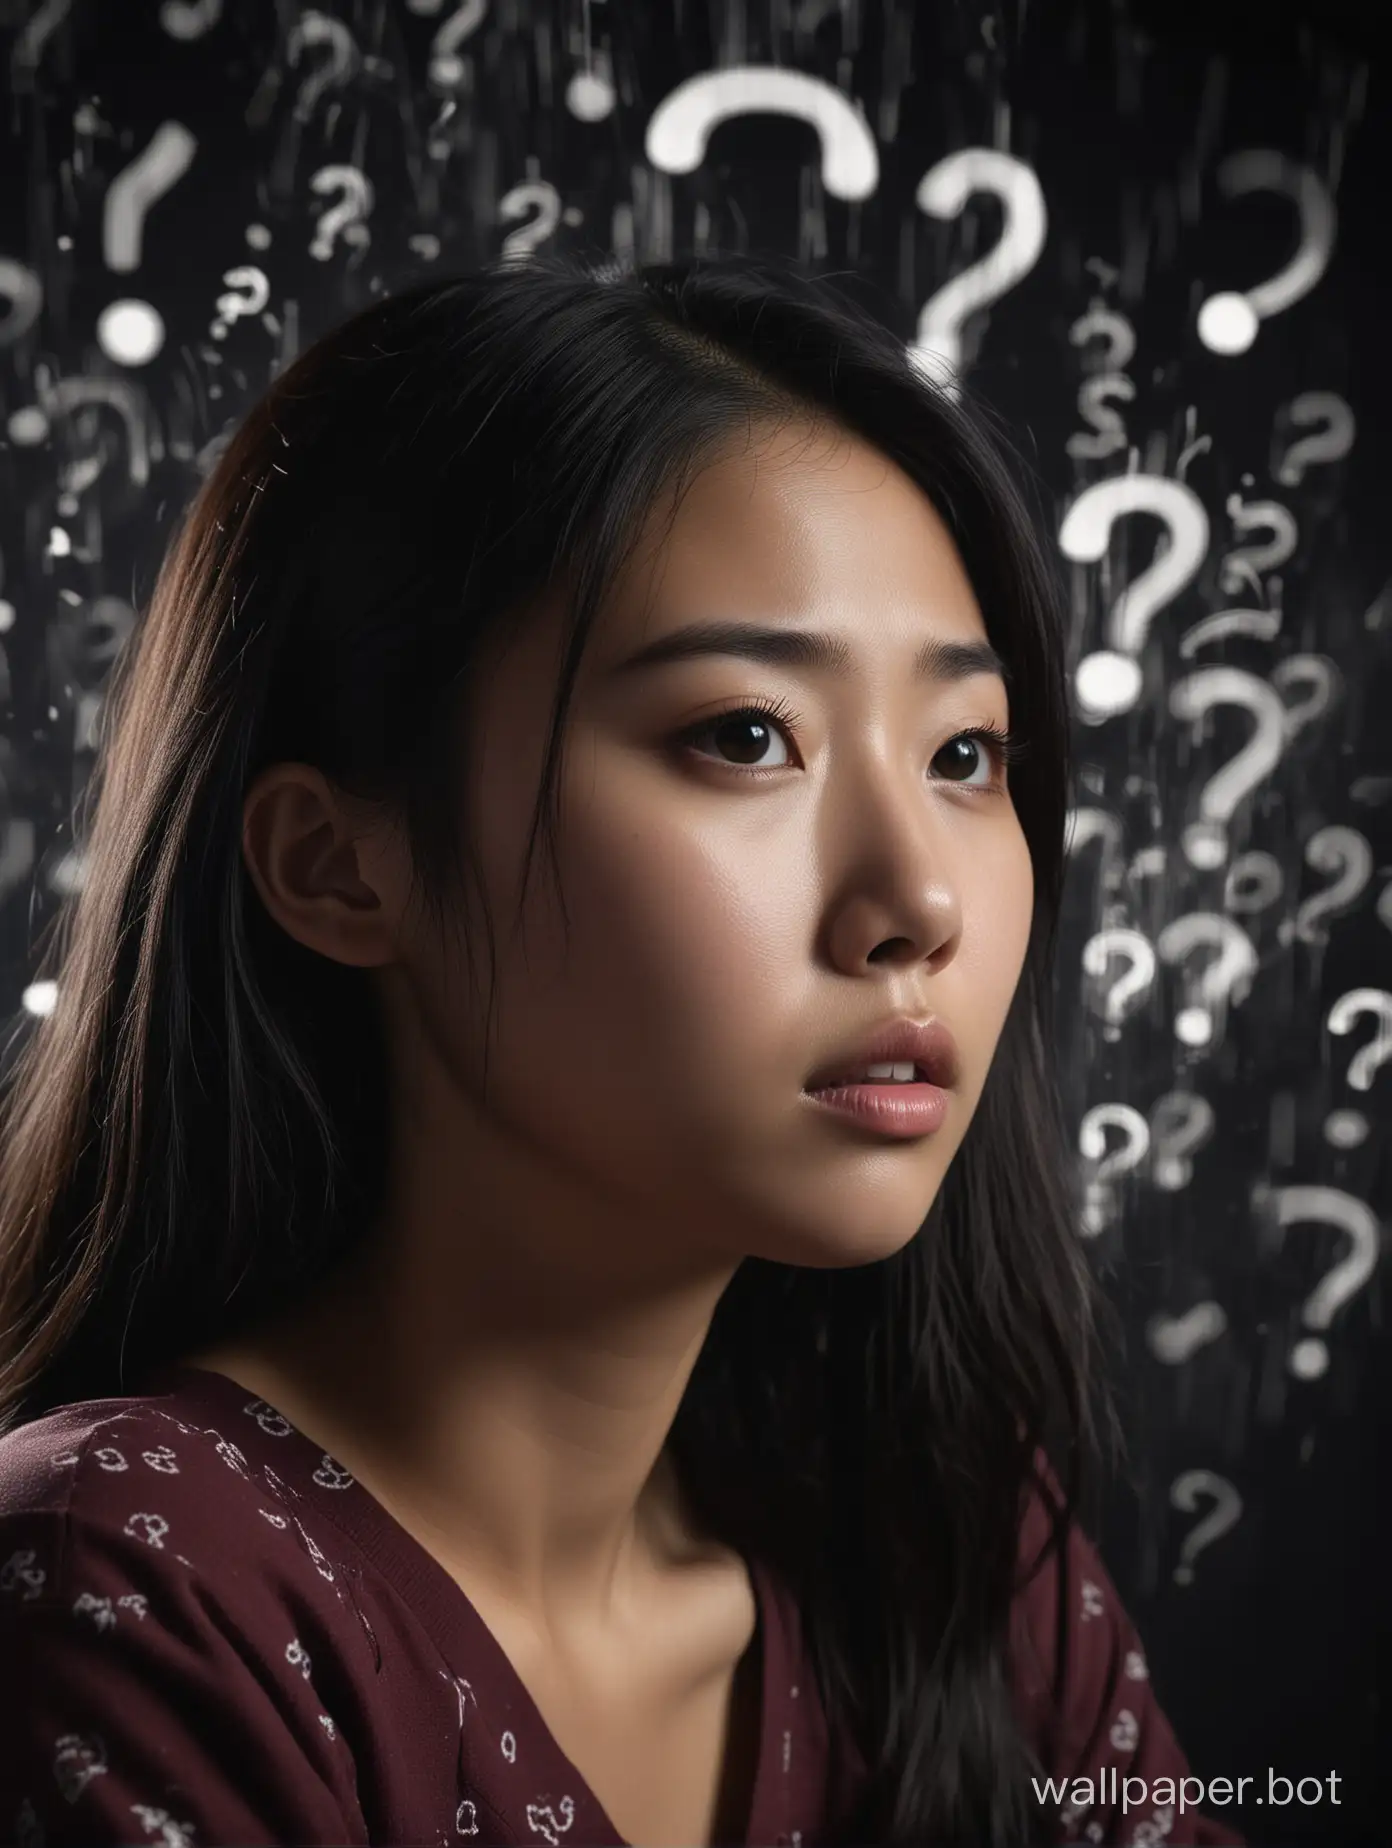 A 21 year old asian female in deep thought, cinematic, dark, with question marks swirling in the background